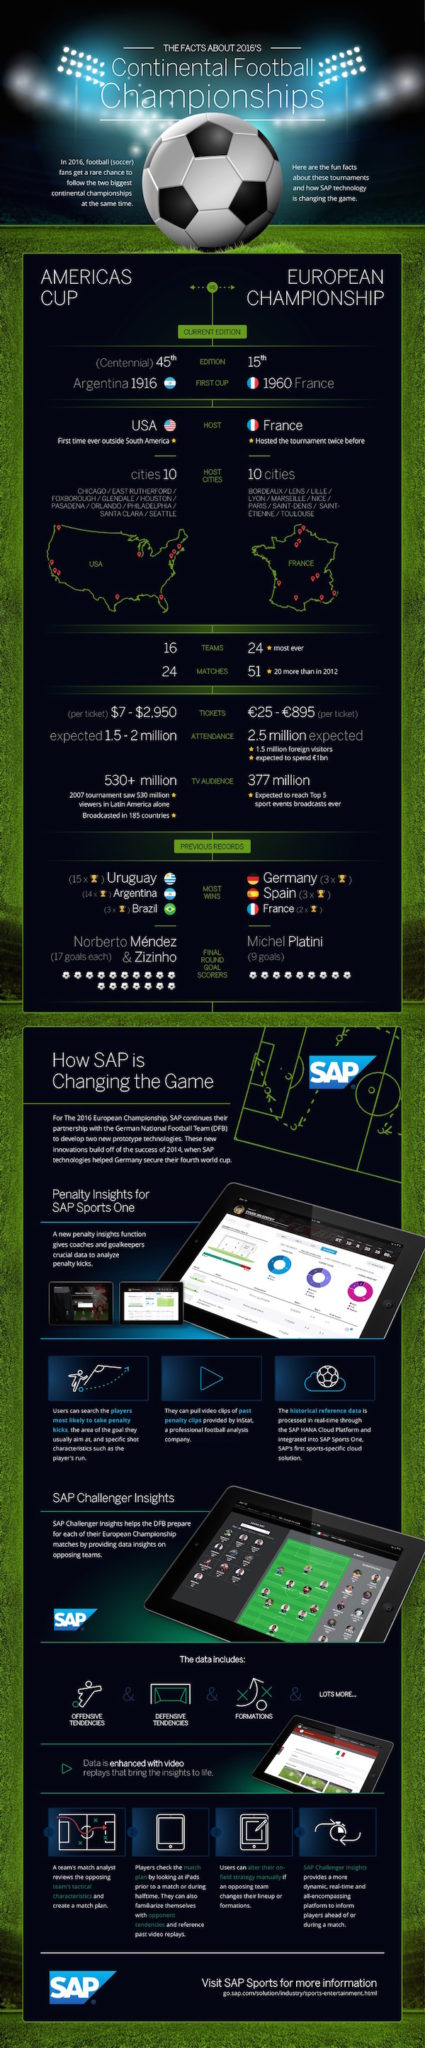 Soccer has gone global... SAP changing football infographic